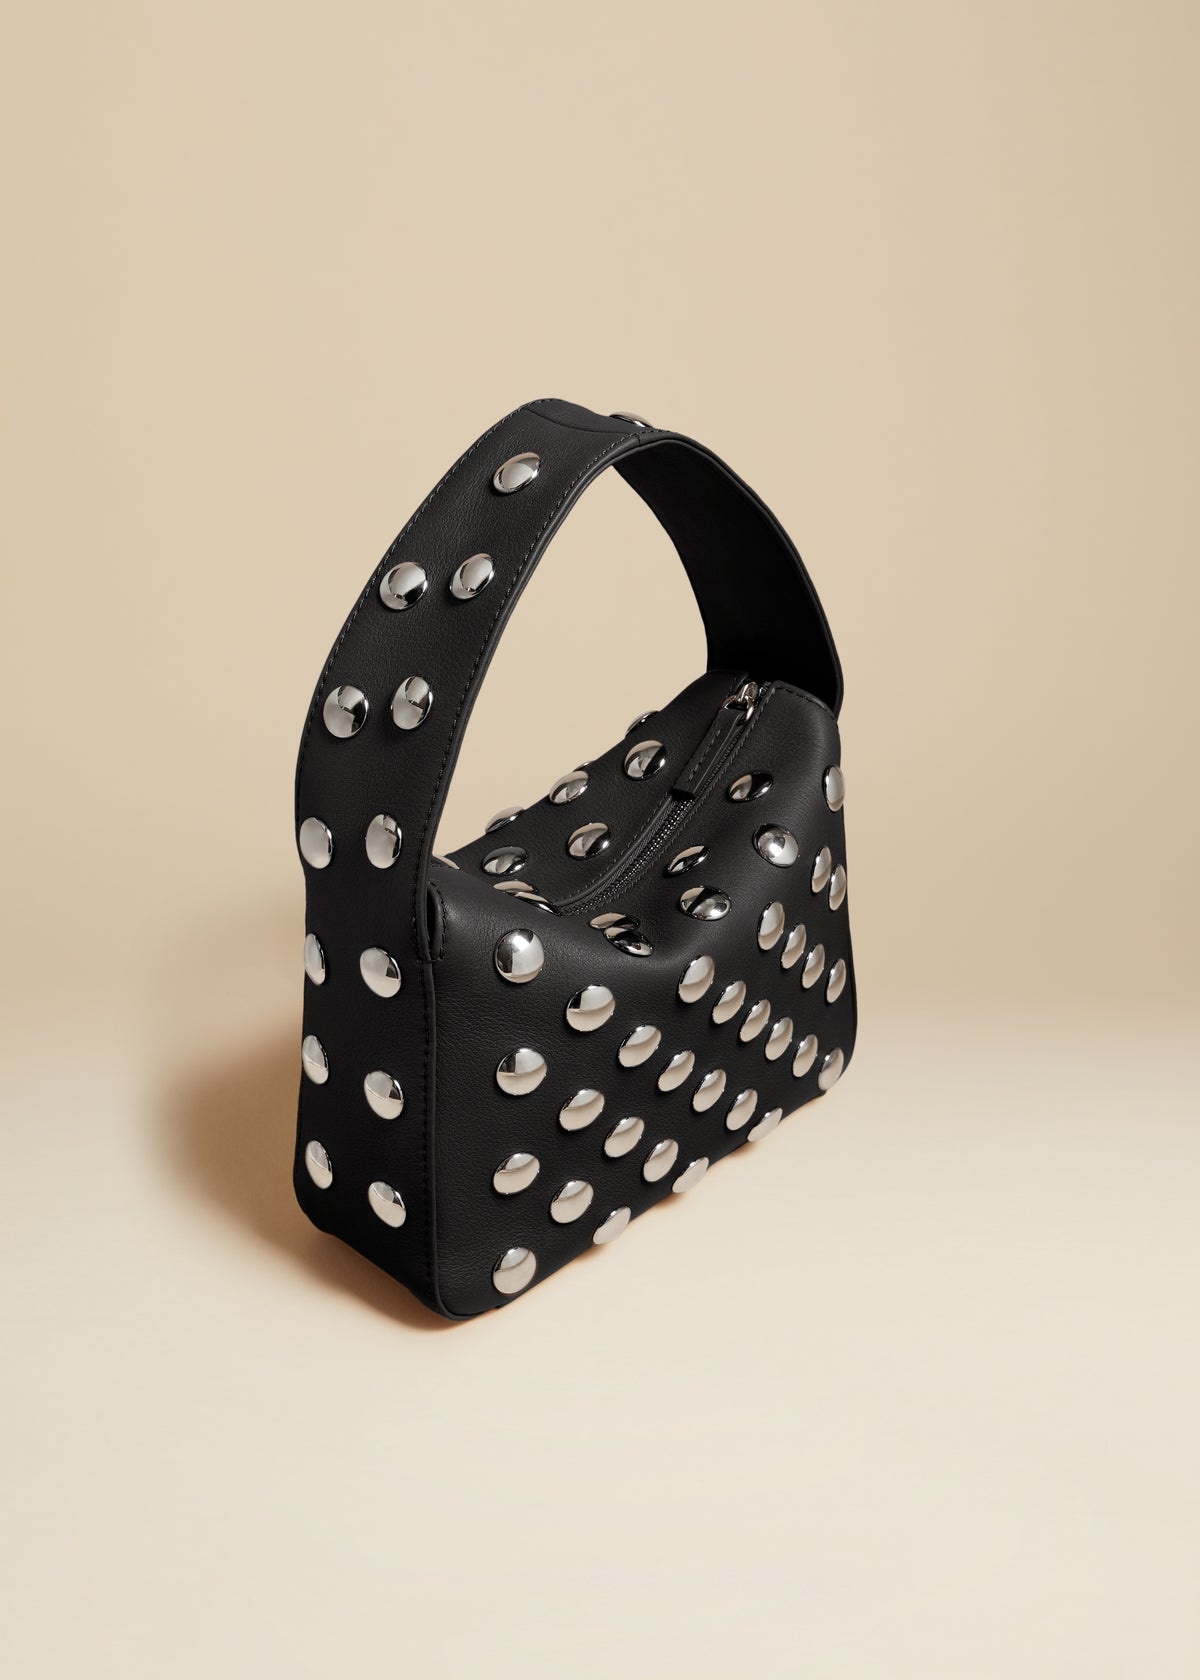 The Small Elena Bag in Black Leather with Studs - 2